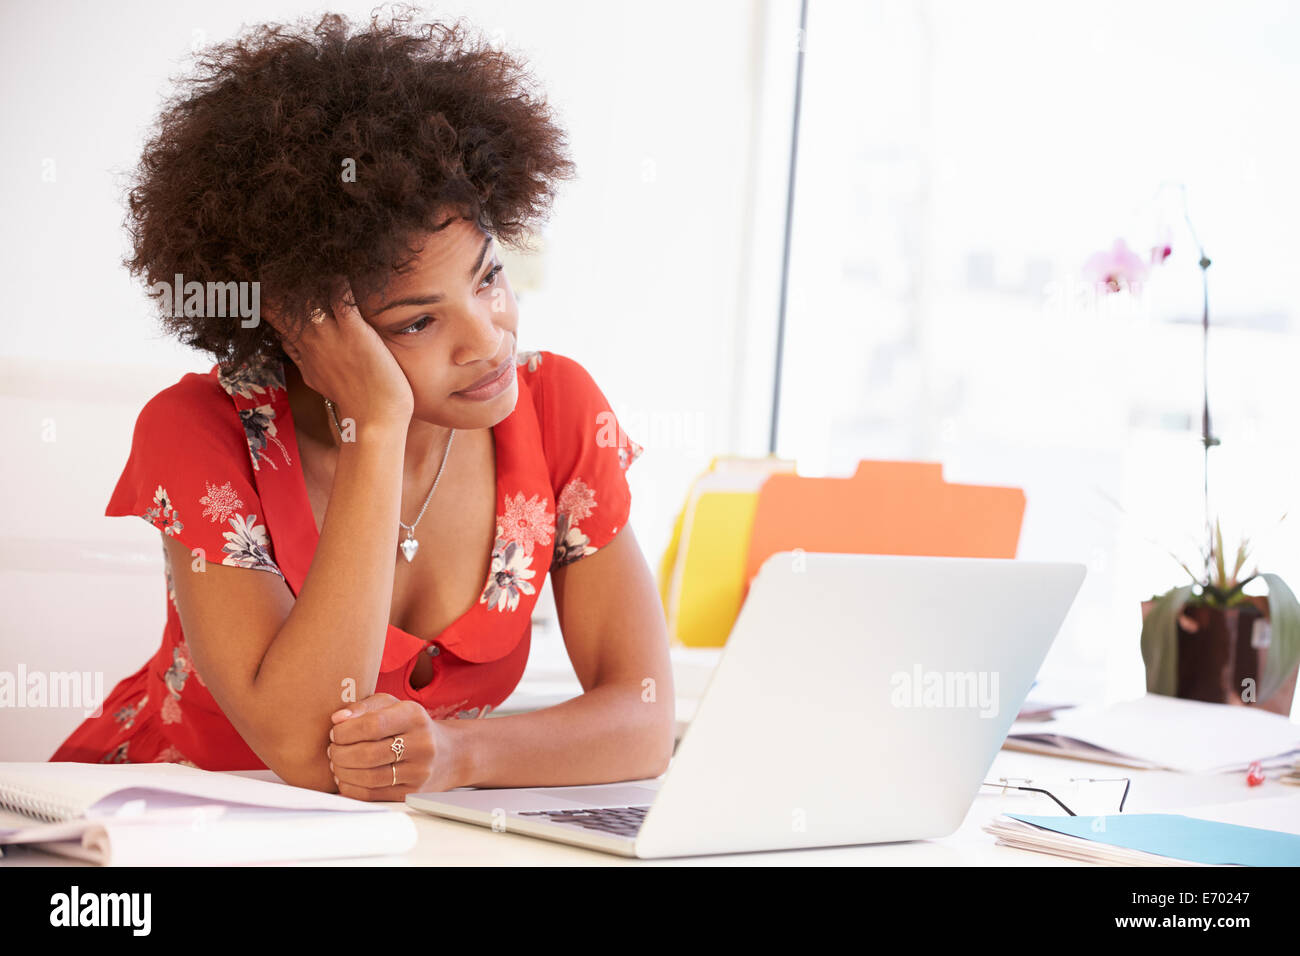 Frustrated Woman Working At Desk In Design Studio Stock Photo